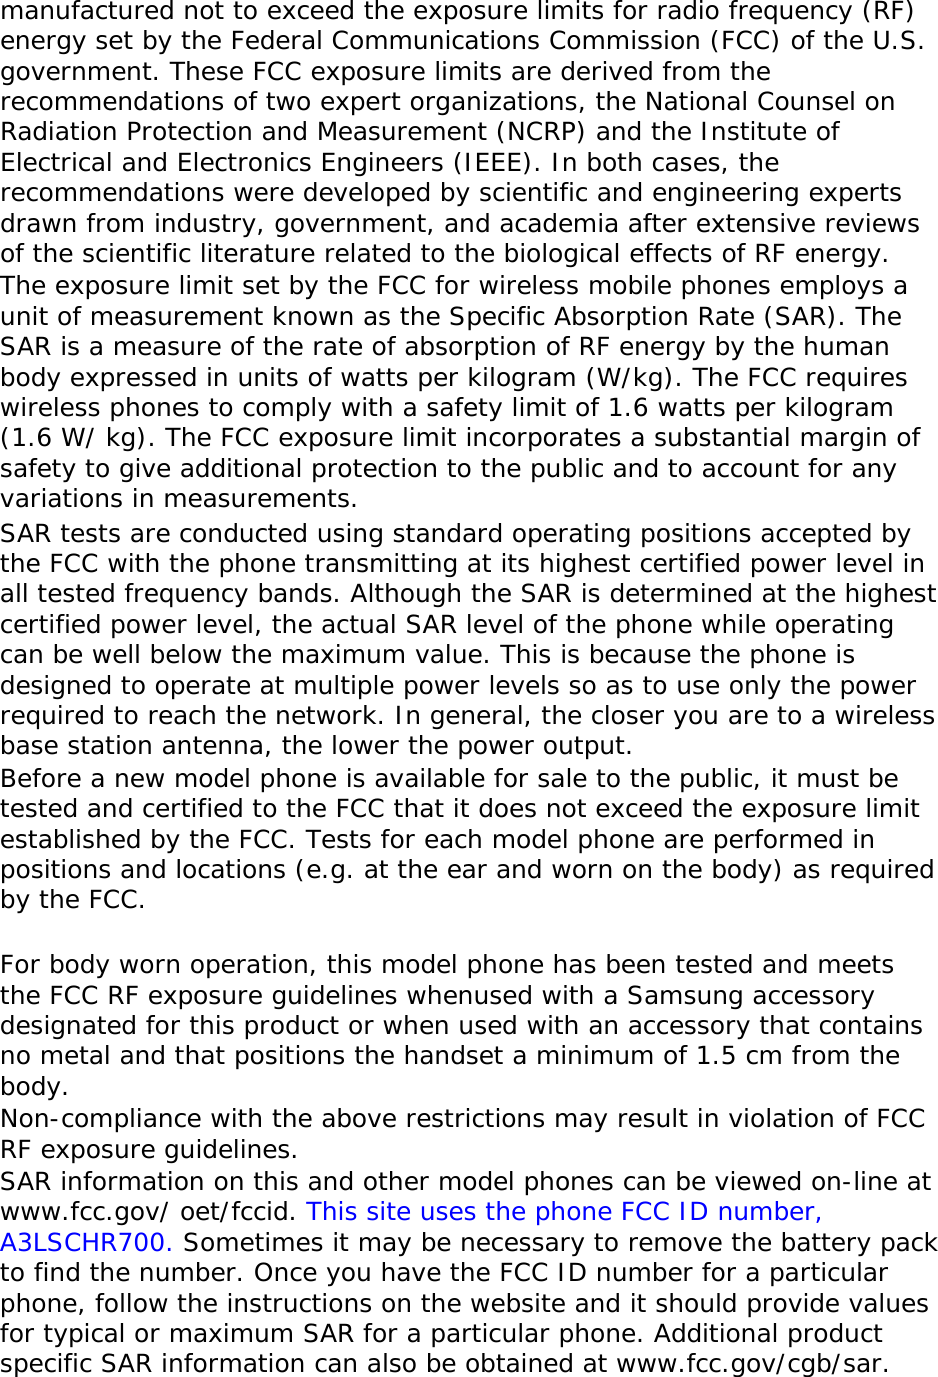 manufactured not to exceed the exposure limits for radio frequency (RF) energy set by the Federal Communications Commission (FCC) of the U.S. government. These FCC exposure limits are derived from the recommendations of two expert organizations, the National Counsel on Radiation Protection and Measurement (NCRP) and the Institute of Electrical and Electronics Engineers (IEEE). In both cases, the recommendations were developed by scientific and engineering experts drawn from industry, government, and academia after extensive reviews of the scientific literature related to the biological effects of RF energy. The exposure limit set by the FCC for wireless mobile phones employs a unit of measurement known as the Specific Absorption Rate (SAR). The SAR is a measure of the rate of absorption of RF energy by the human body expressed in units of watts per kilogram (W/kg). The FCC requires wireless phones to comply with a safety limit of 1.6 watts per kilogram (1.6 W/ kg). The FCC exposure limit incorporates a substantial margin of safety to give additional protection to the public and to account for any variations in measurements. SAR tests are conducted using standard operating positions accepted by the FCC with the phone transmitting at its highest certified power level in all tested frequency bands. Although the SAR is determined at the highest certified power level, the actual SAR level of the phone while operating can be well below the maximum value. This is because the phone is designed to operate at multiple power levels so as to use only the power required to reach the network. In general, the closer you are to a wireless base station antenna, the lower the power output. Before a new model phone is available for sale to the public, it must be tested and certified to the FCC that it does not exceed the exposure limit established by the FCC. Tests for each model phone are performed in positions and locations (e.g. at the ear and worn on the body) as required by the FCC.    For body worn operation, this model phone has been tested and meets the FCC RF exposure guidelines whenused with a Samsung accessory designated for this product or when used with an accessory that contains no metal and that positions the handset a minimum of 1.5 cm from the body.  Non-compliance with the above restrictions may result in violation of FCC RF exposure guidelines. SAR information on this and other model phones can be viewed on-line at www.fcc.gov/ oet/fccid. This site uses the phone FCC ID number, A3LSCHR700. Sometimes it may be necessary to remove the battery pack to find the number. Once you have the FCC ID number for a particular phone, follow the instructions on the website and it should provide values for typical or maximum SAR for a particular phone. Additional product specific SAR information can also be obtained at www.fcc.gov/cgb/sar. 